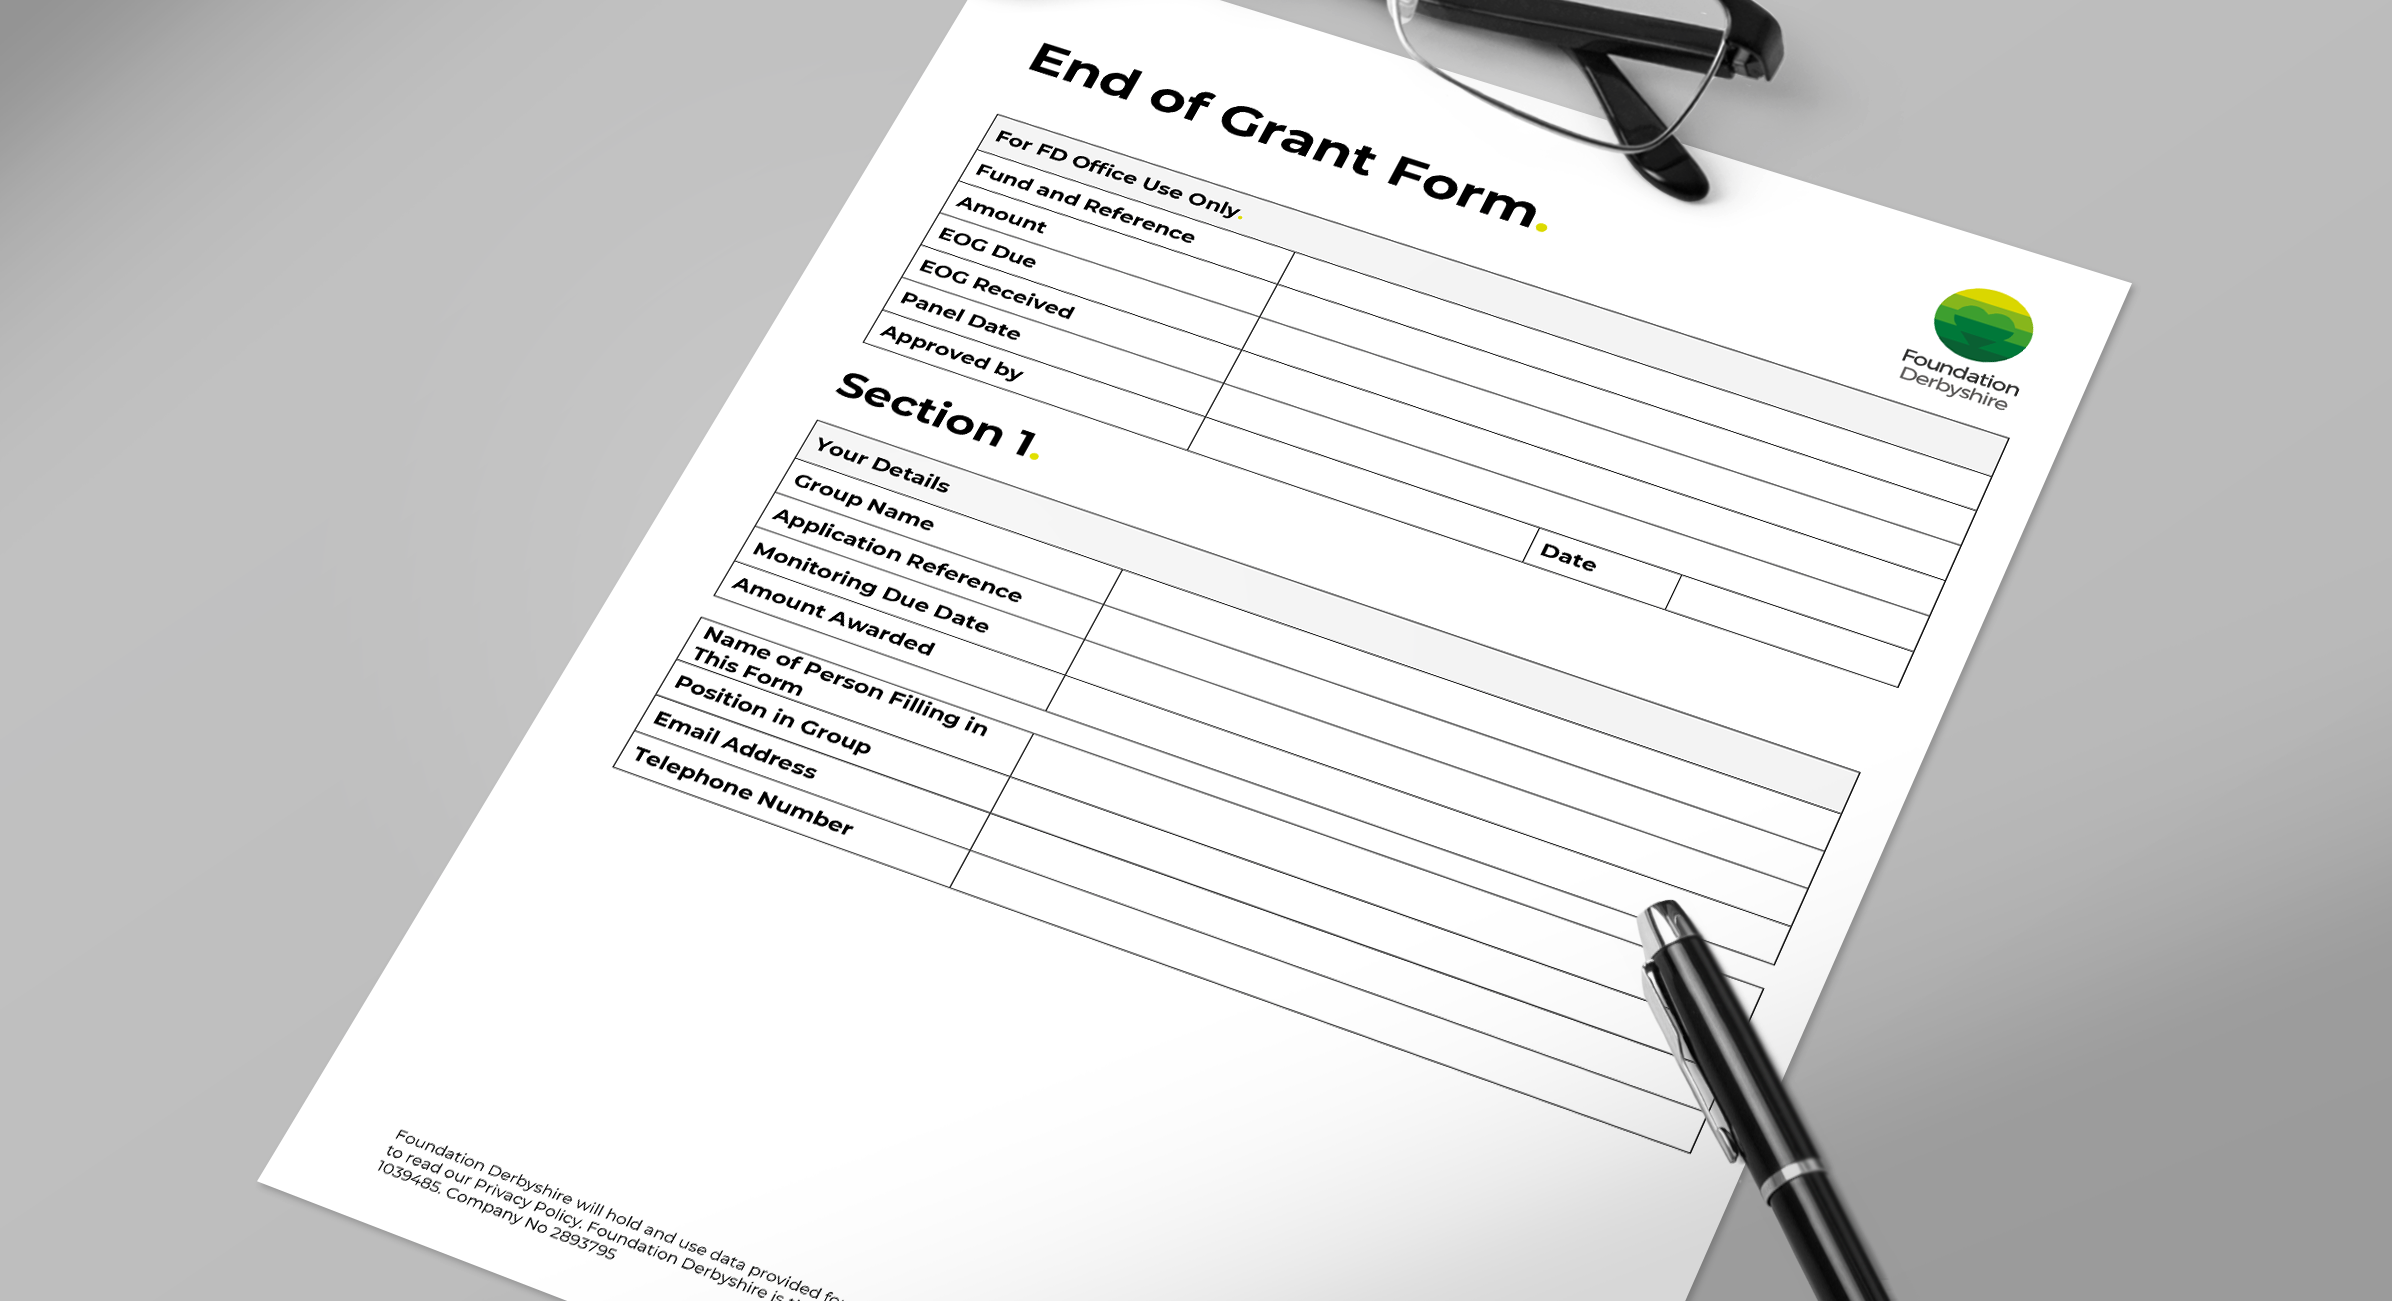 End of Grant Form